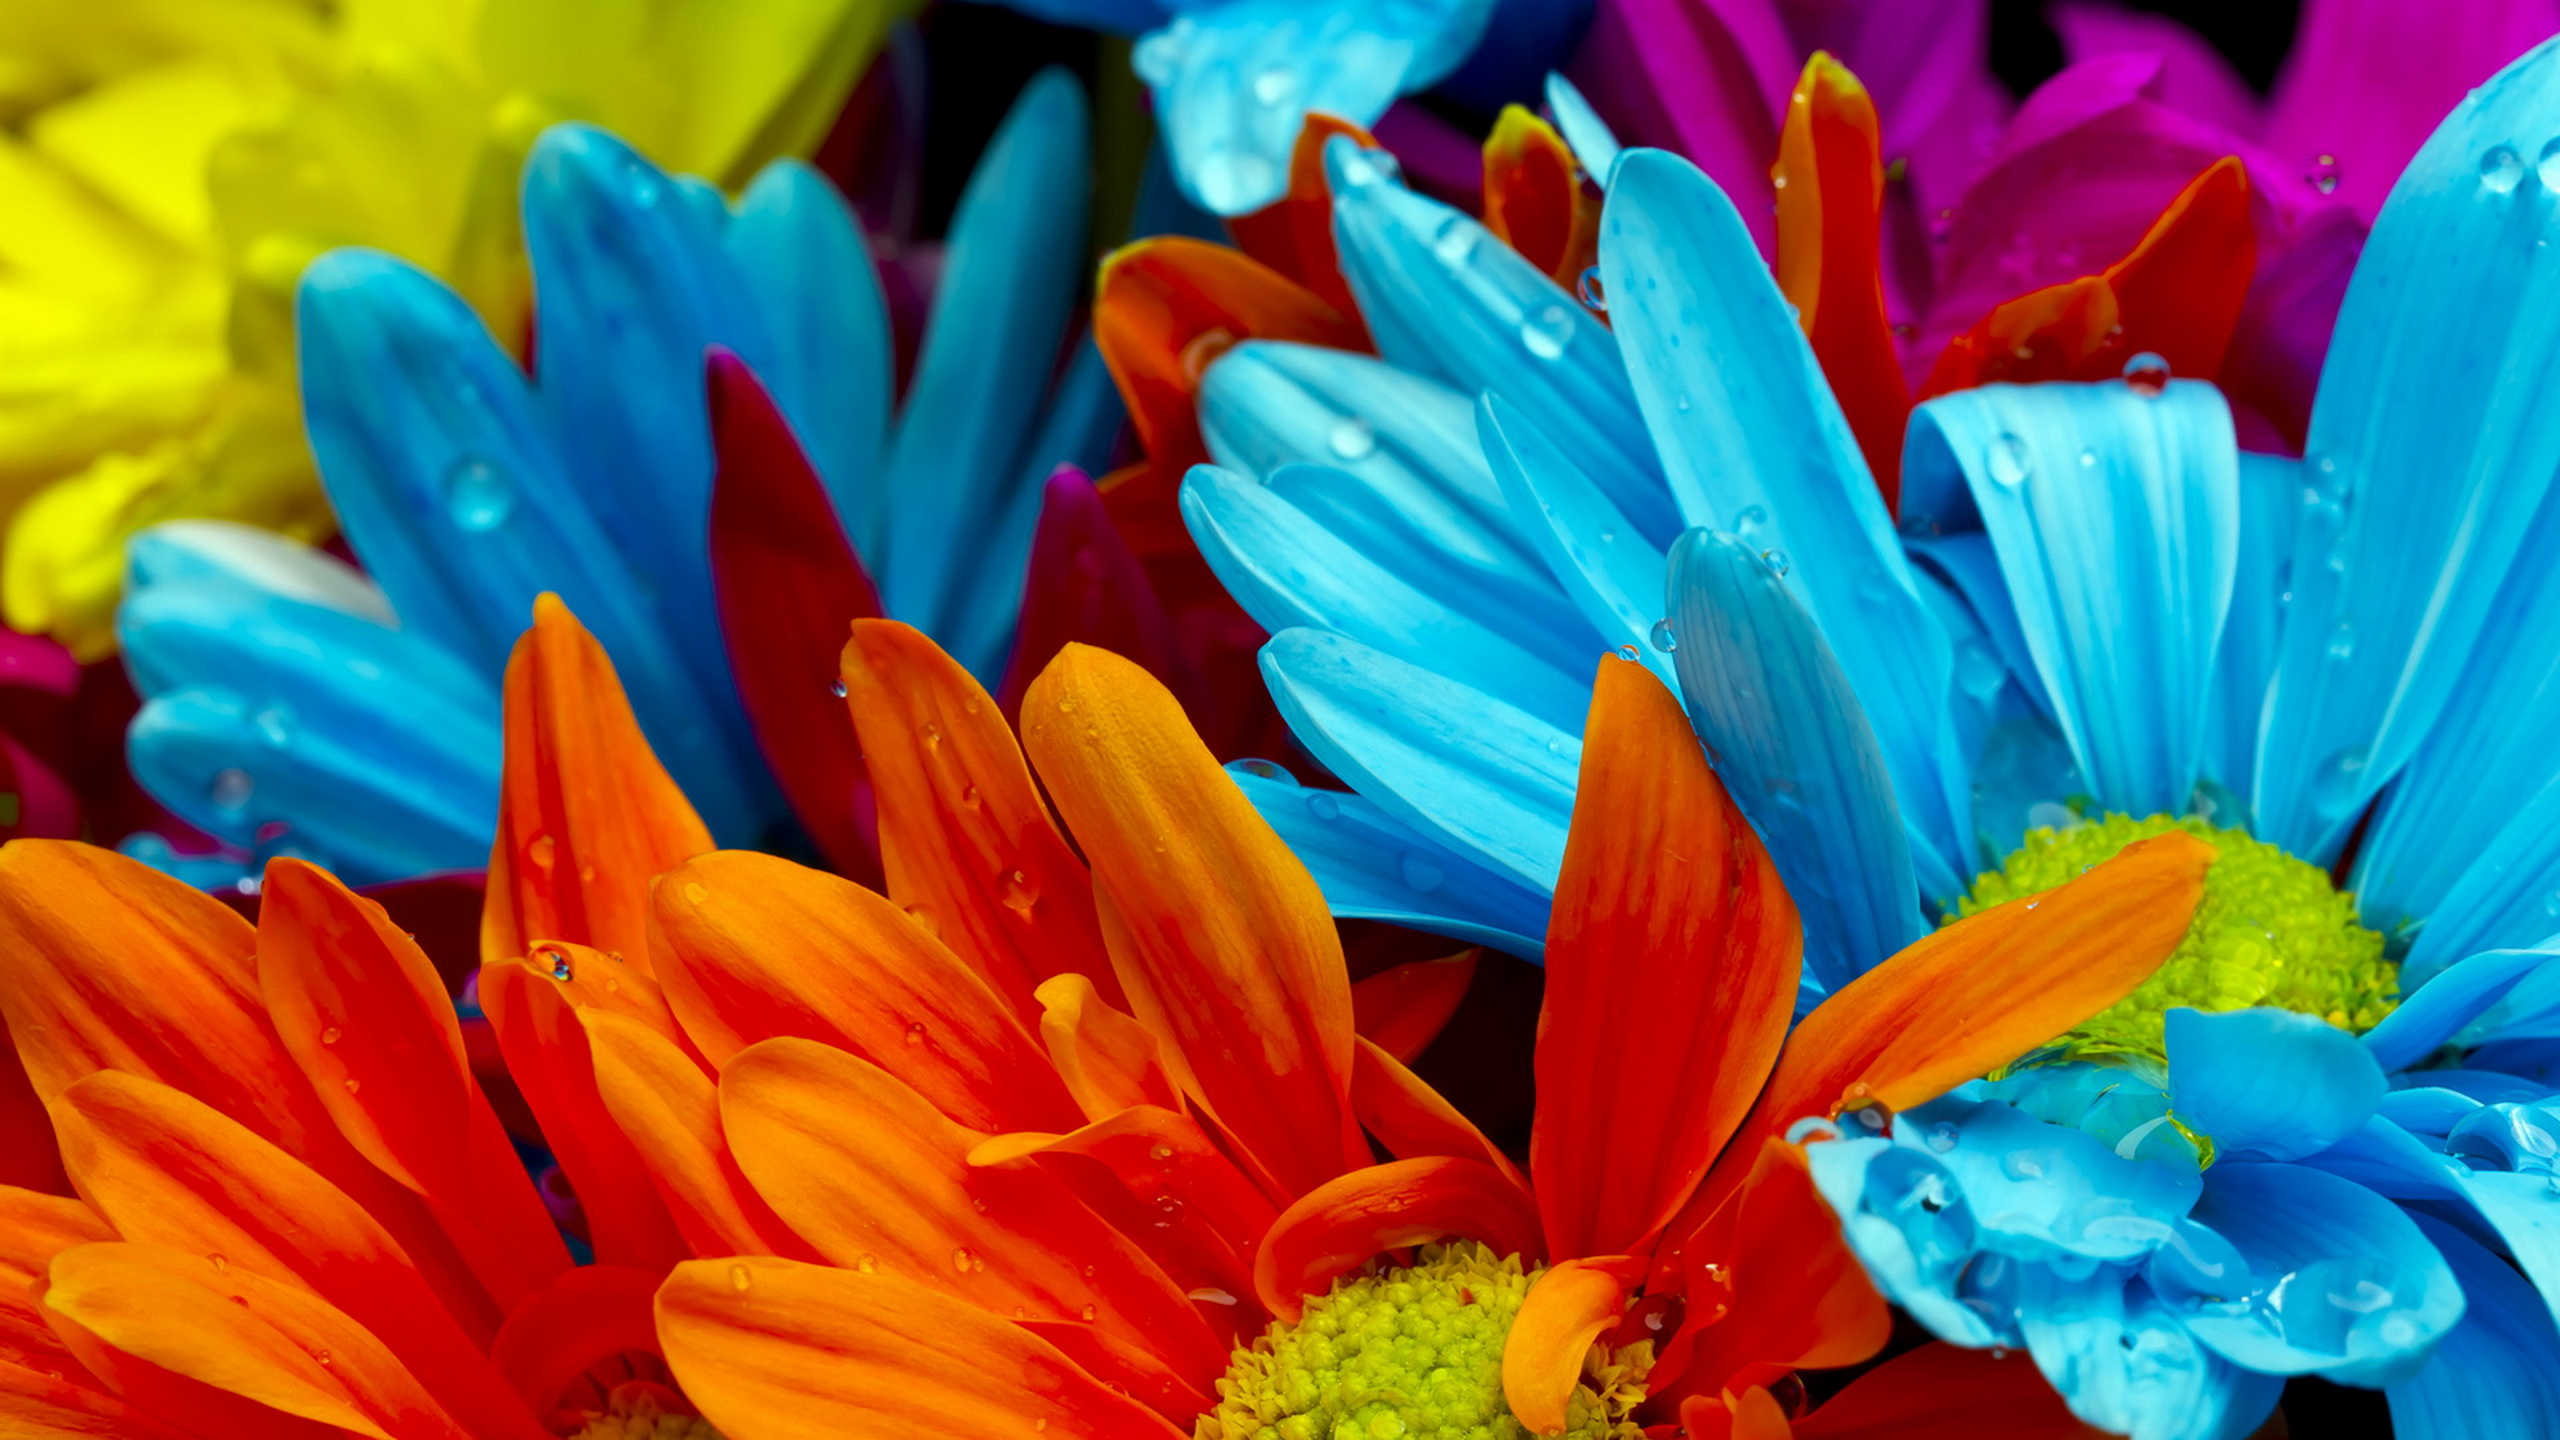 Colorful Daisy Flower Wallpaper